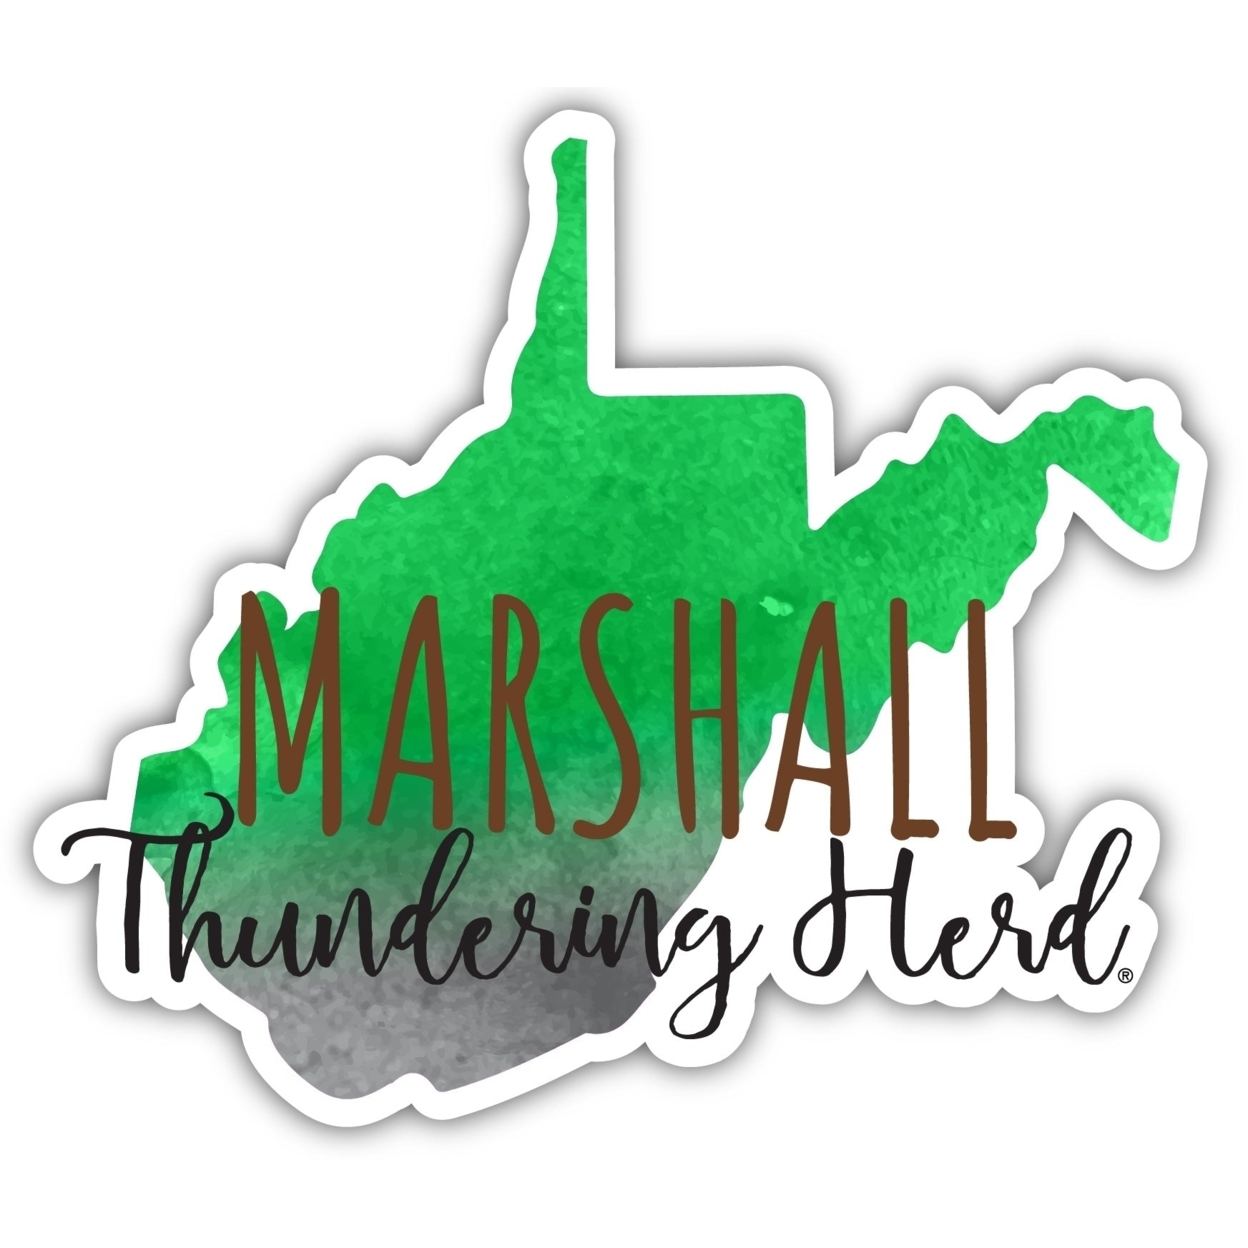 Marshall Thundering Herd Watercolor State Die Cut Decal 4-Inch